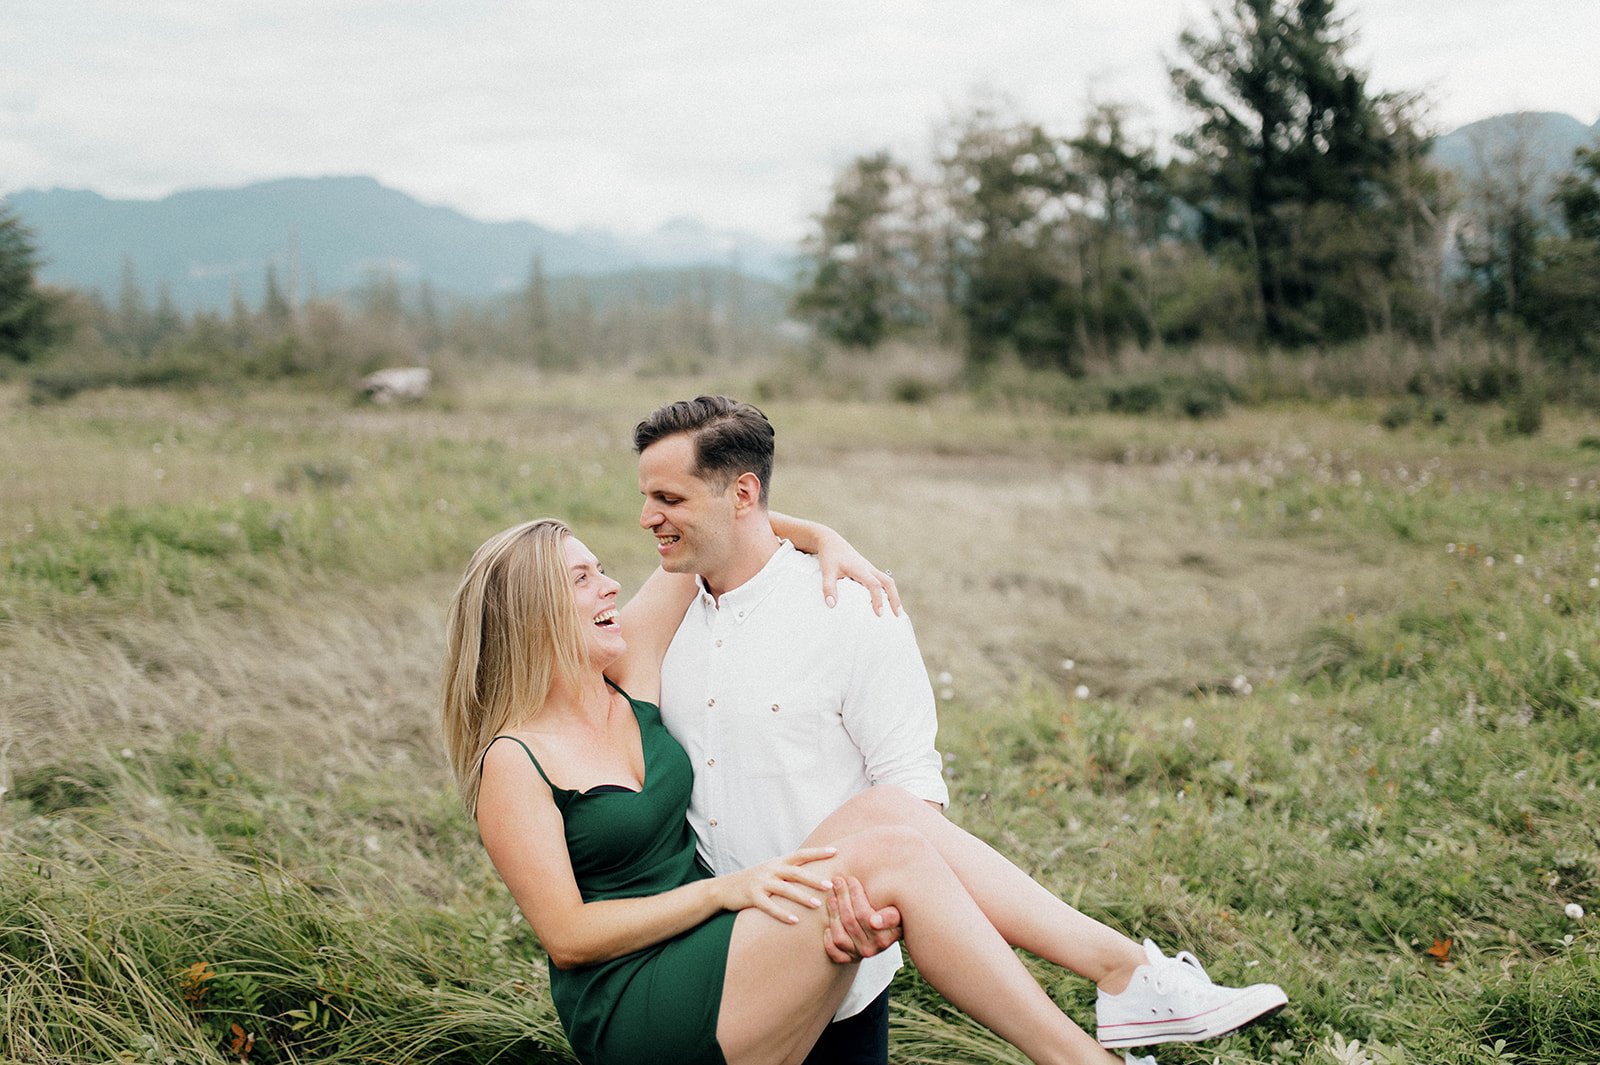 A man twirls around his fiancee in a grassy field in Squamish, BC.